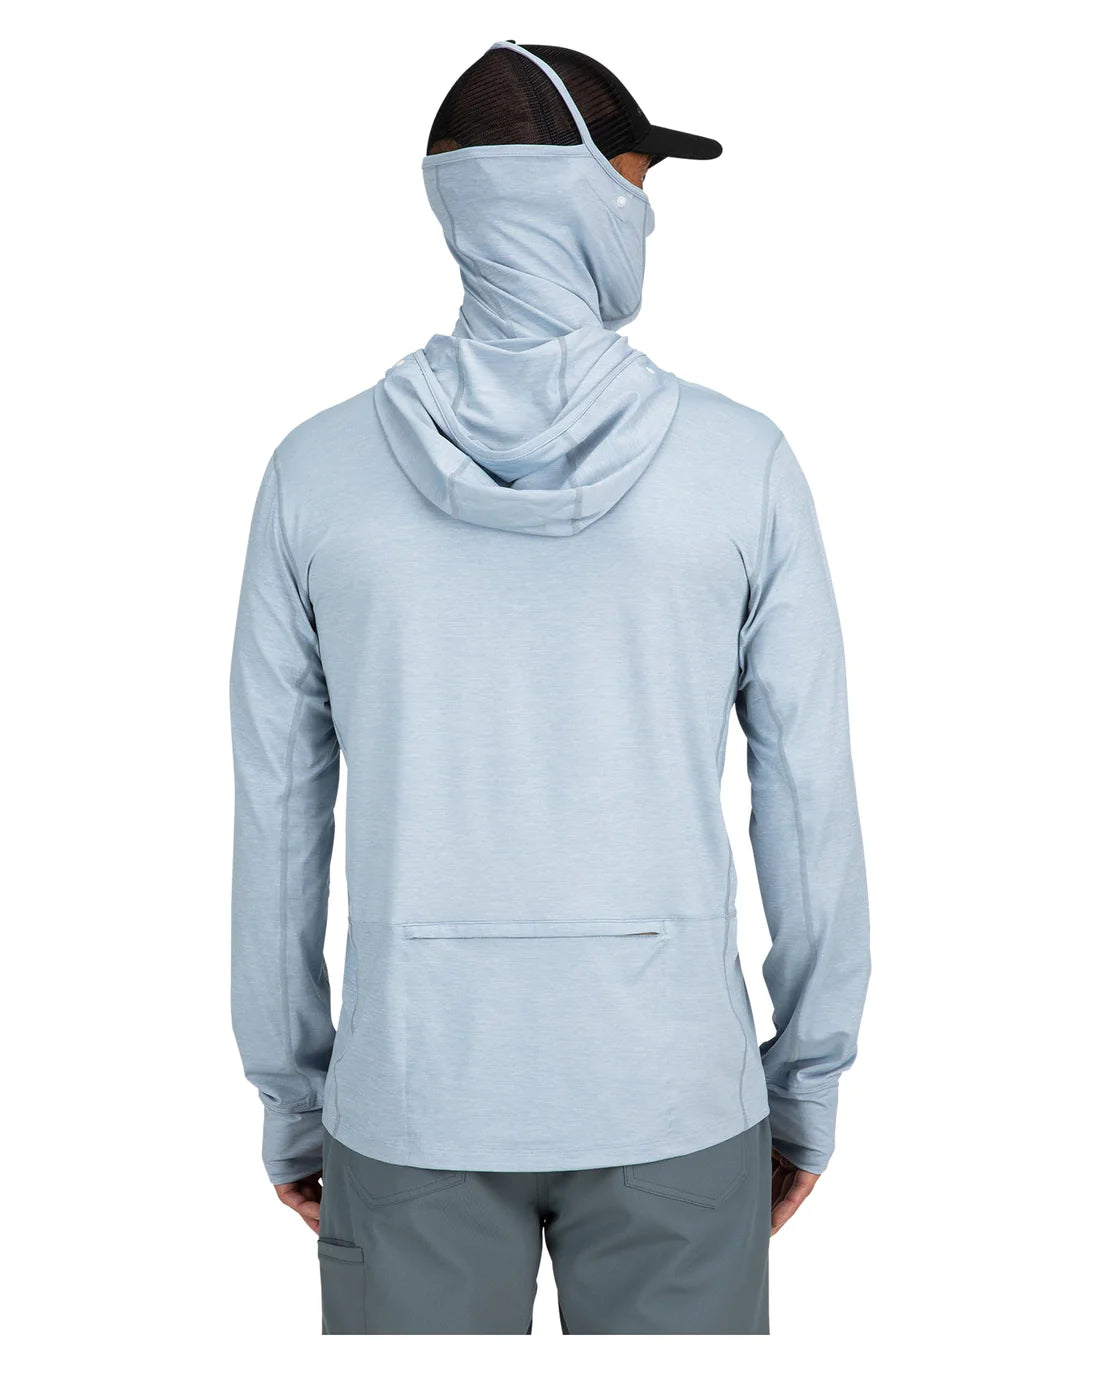 Simms M's SolarFlex Guide Cooling Hoody